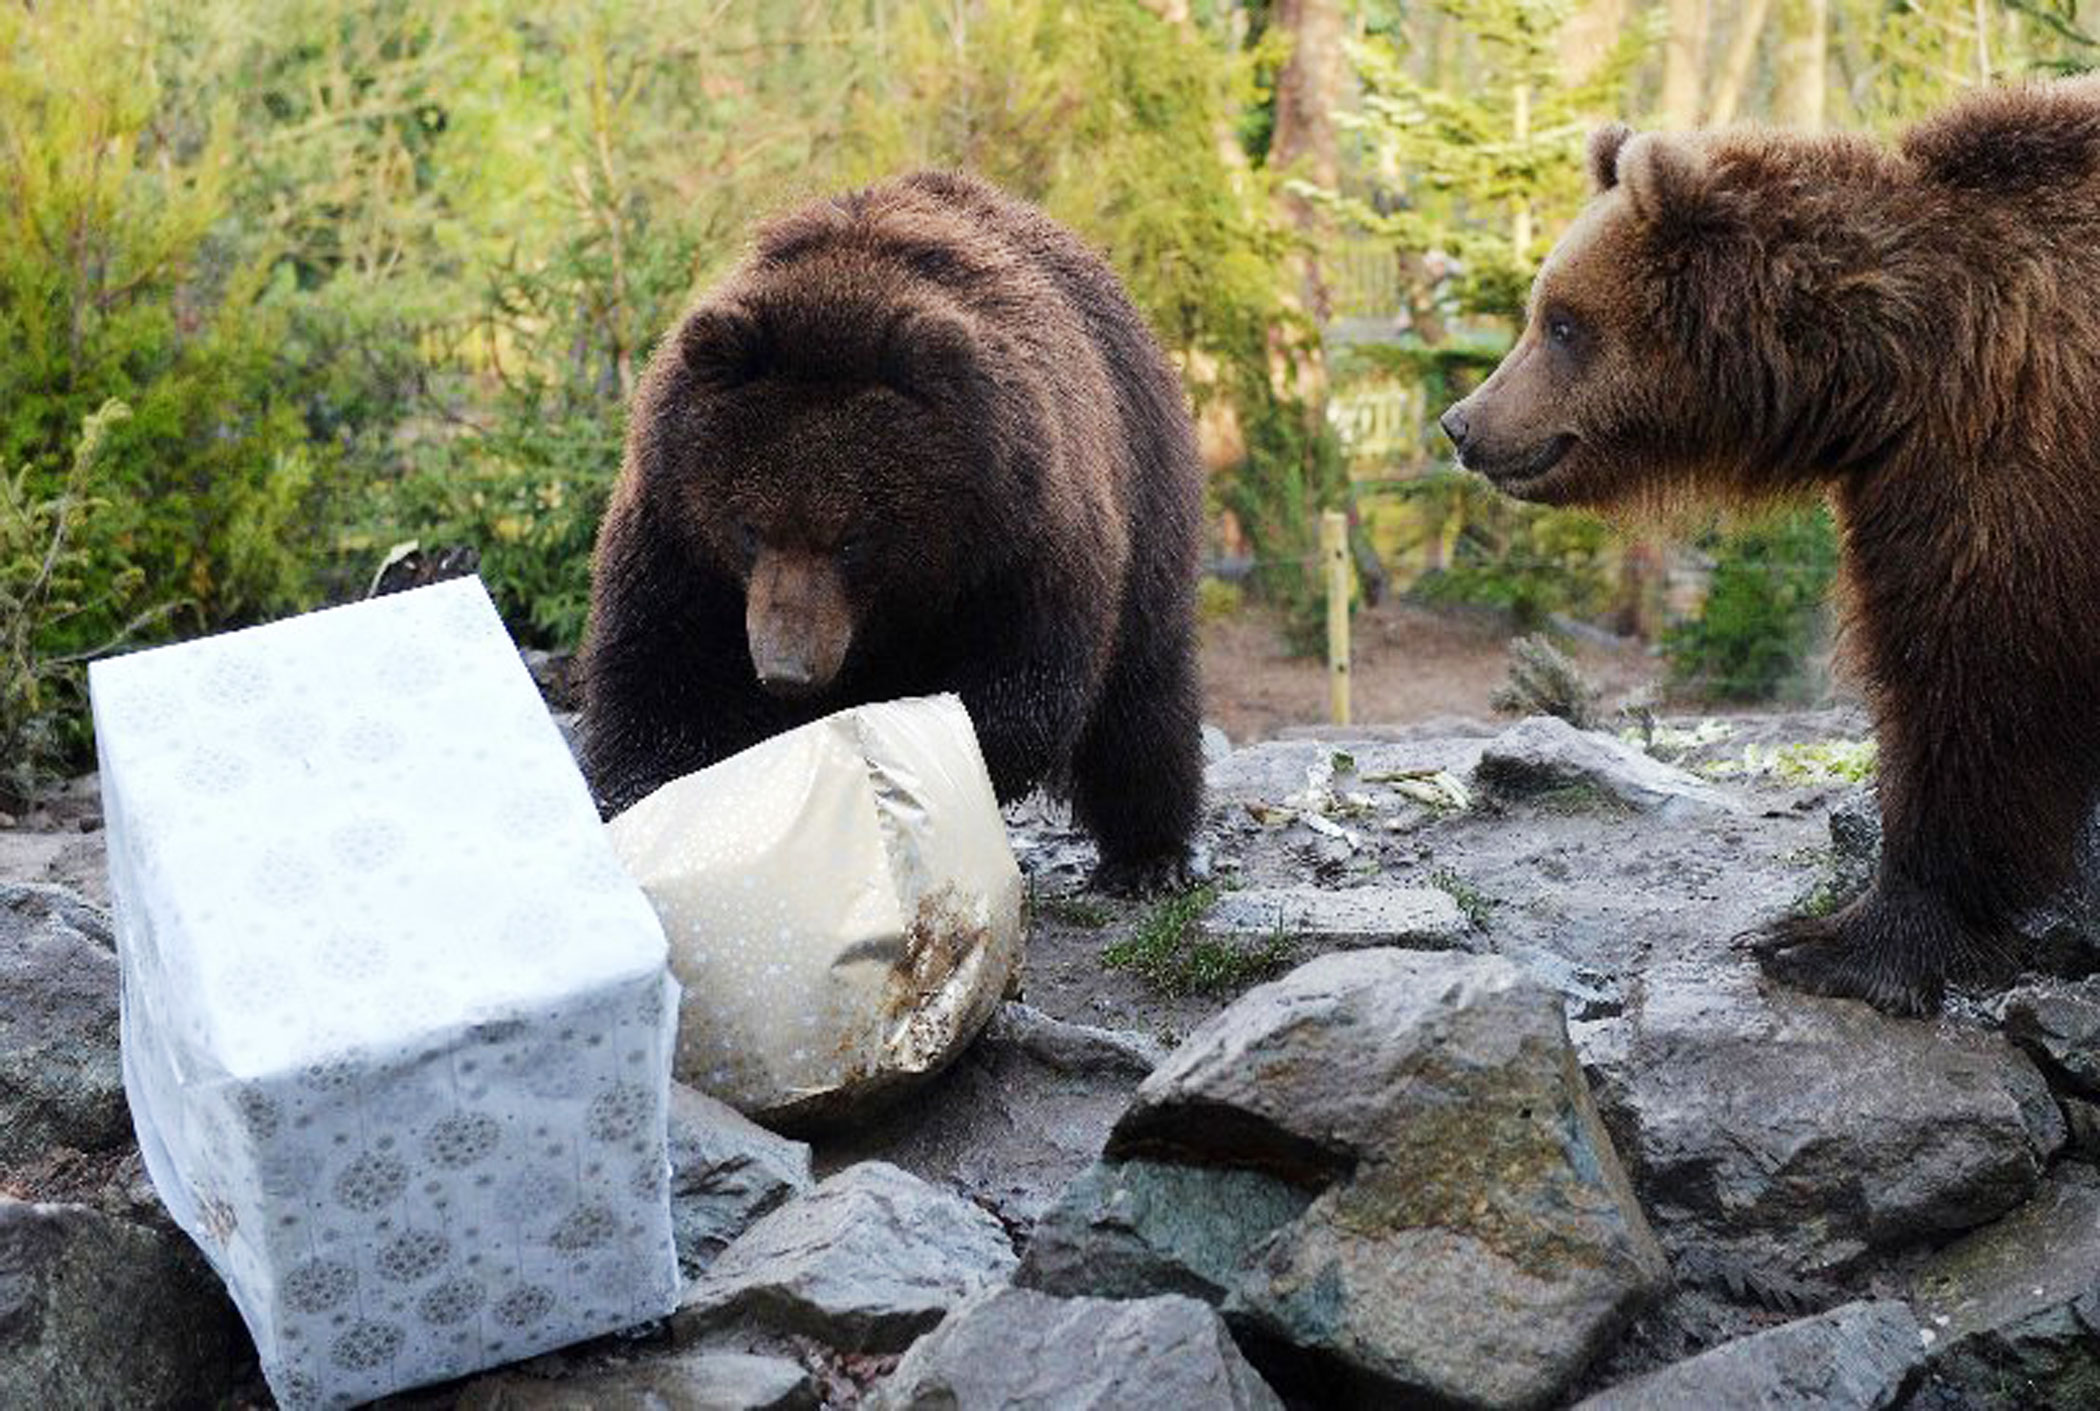 Grizzly bears Igor, left, and Irina open a Christmas package filled with food at the zoo in La Fleche, northwestern France, on Dec. 23, 2015.